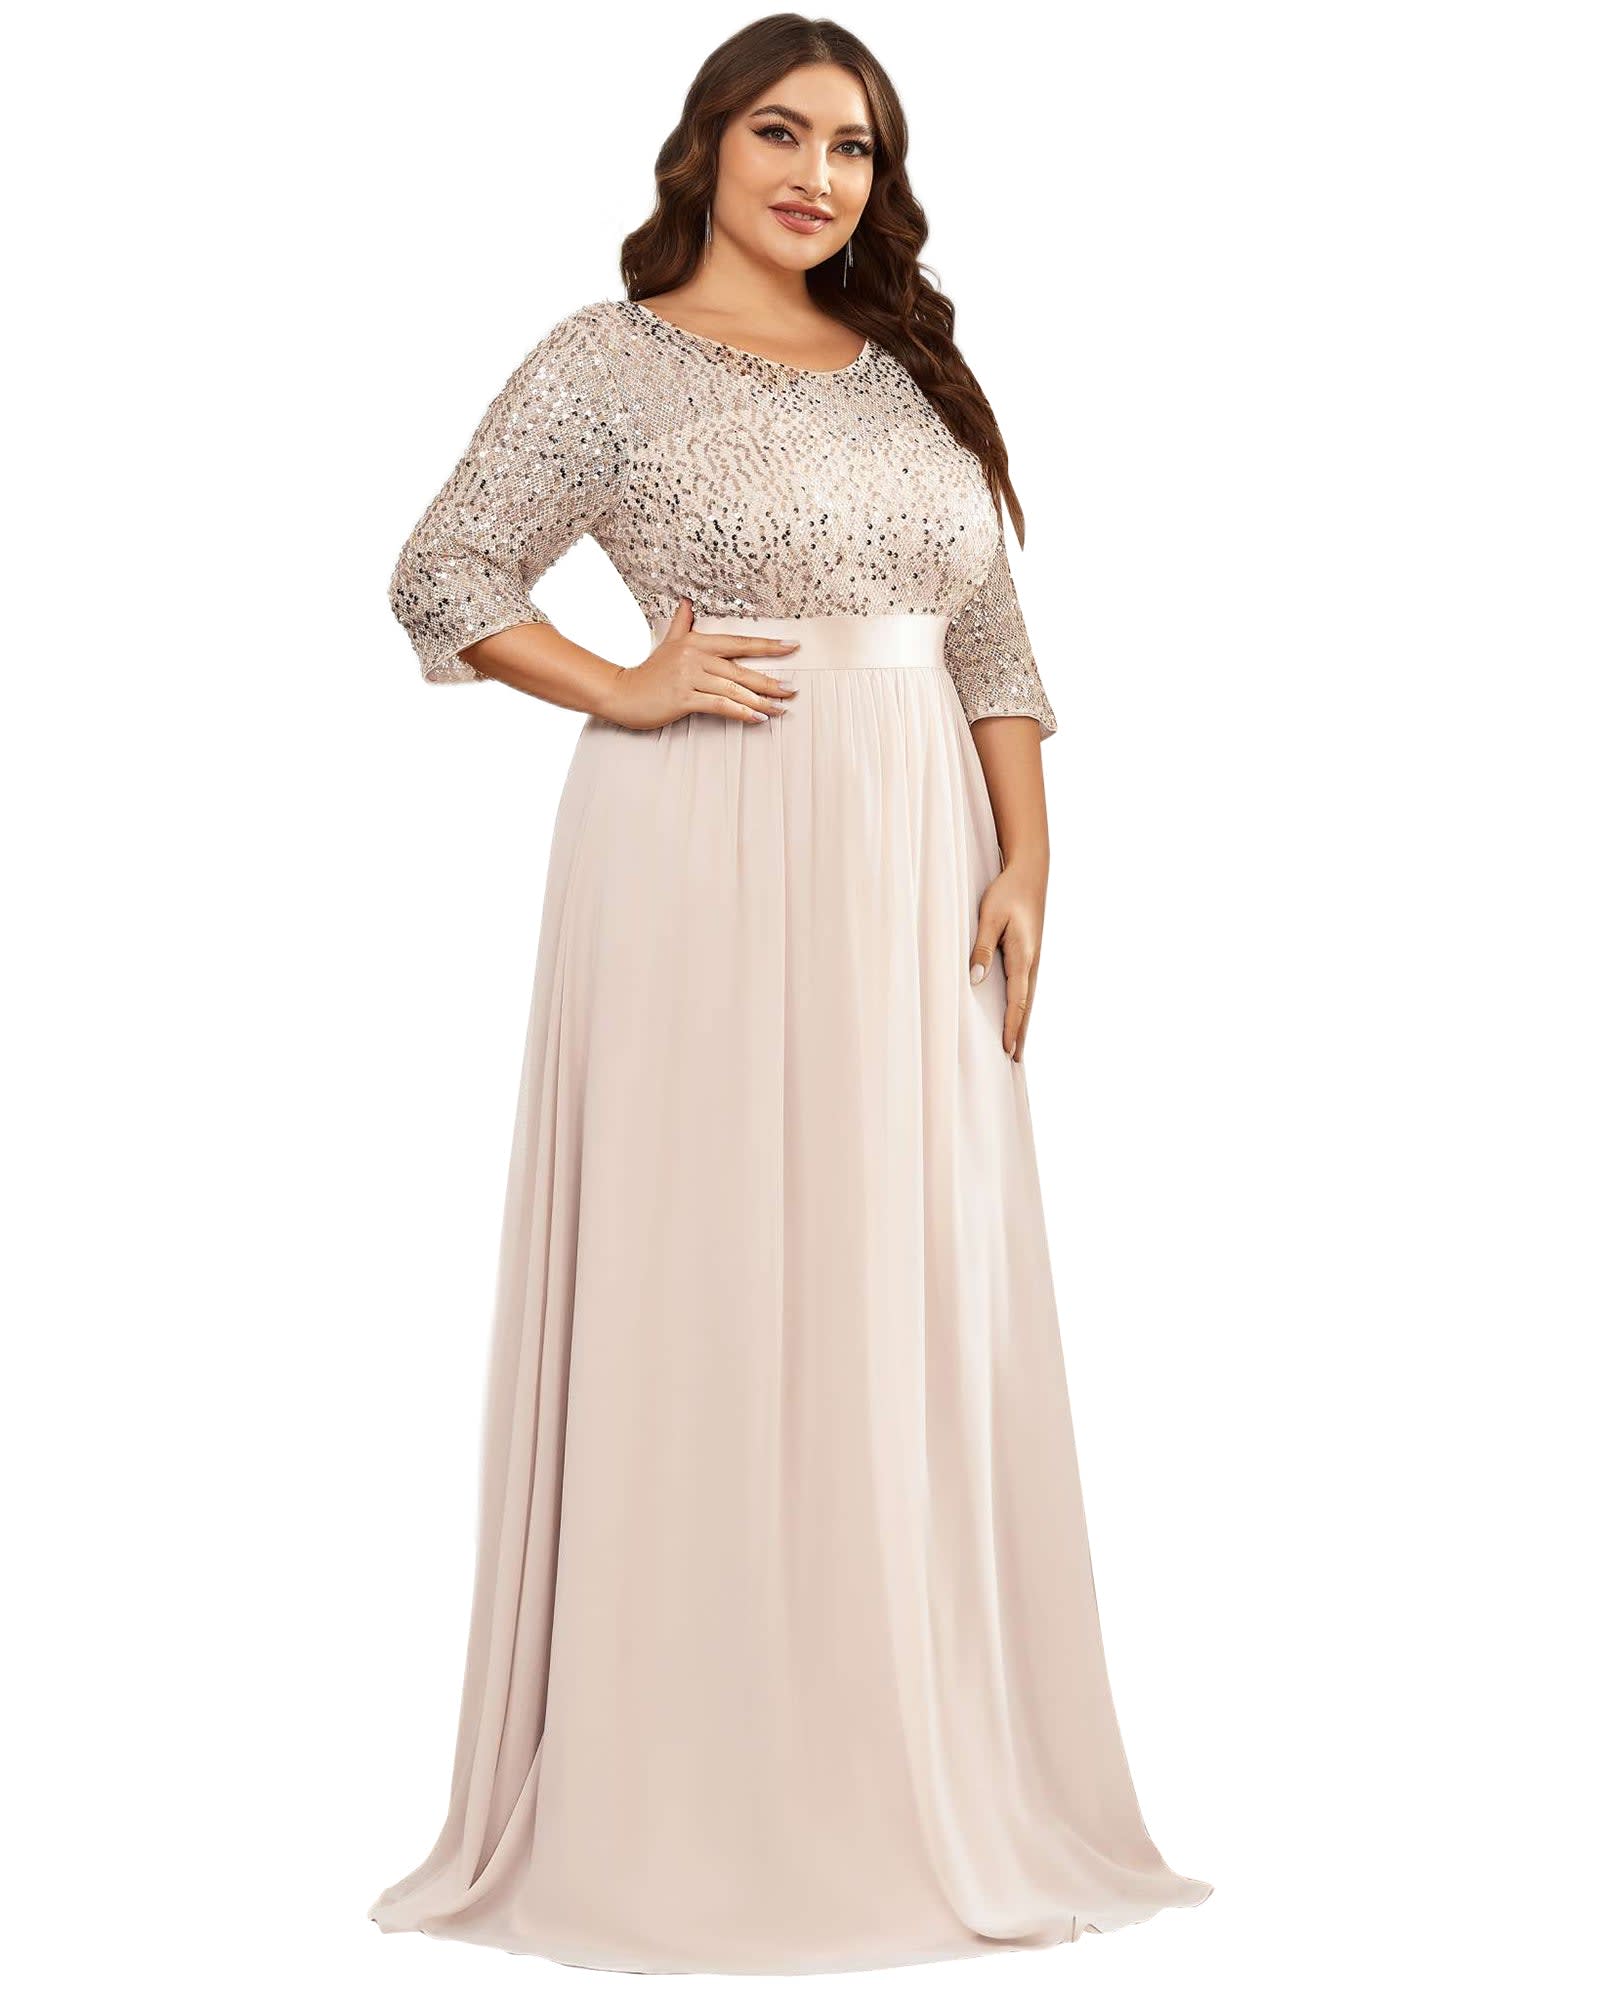 3/4 Sleeves Round Neck Evening Dress With Sequin Bodice | Blush